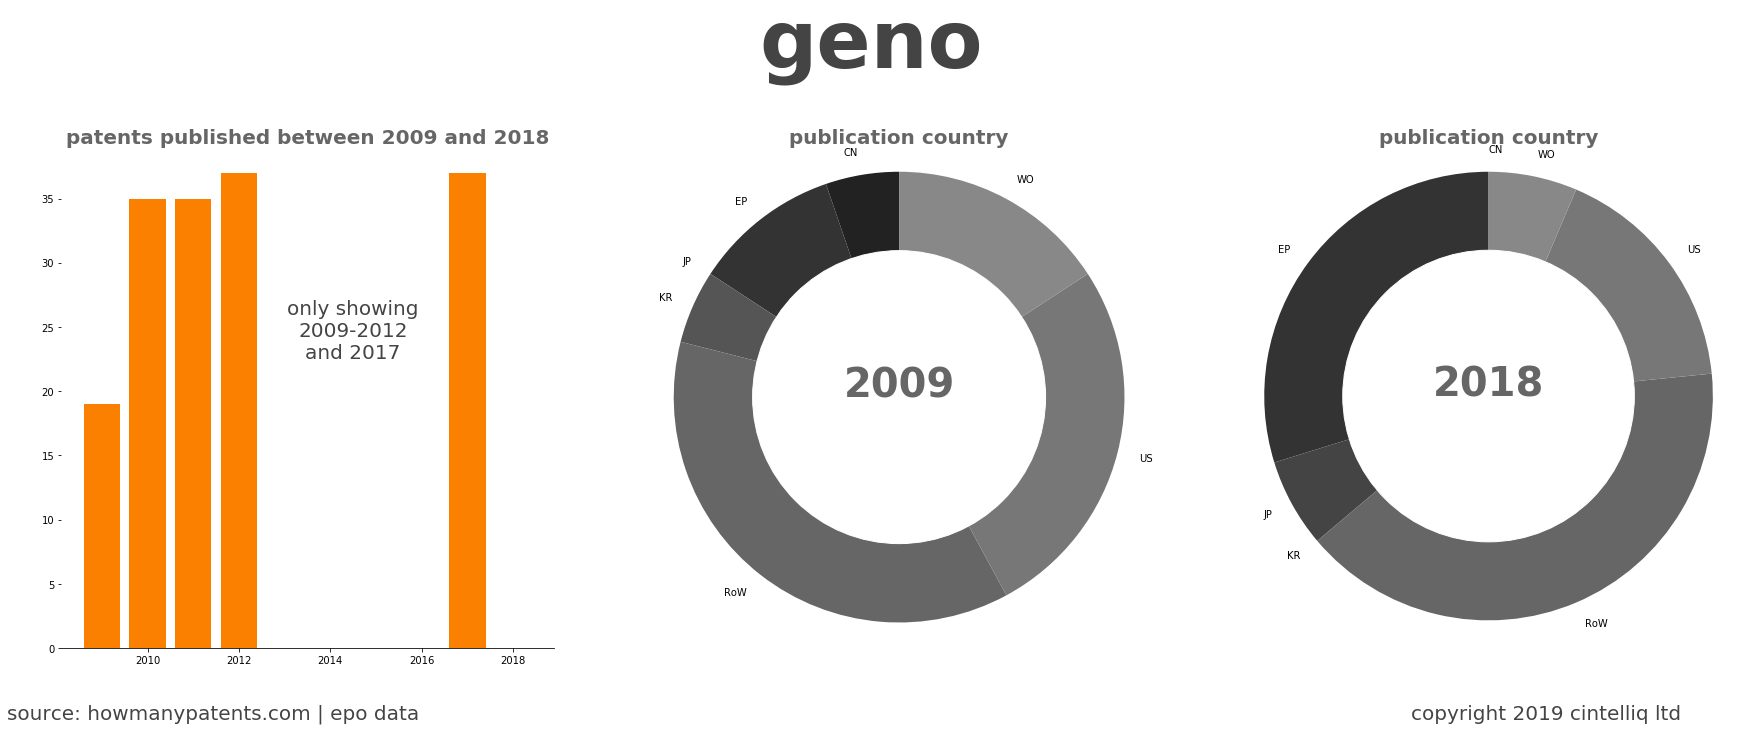 summary of patents for Geno